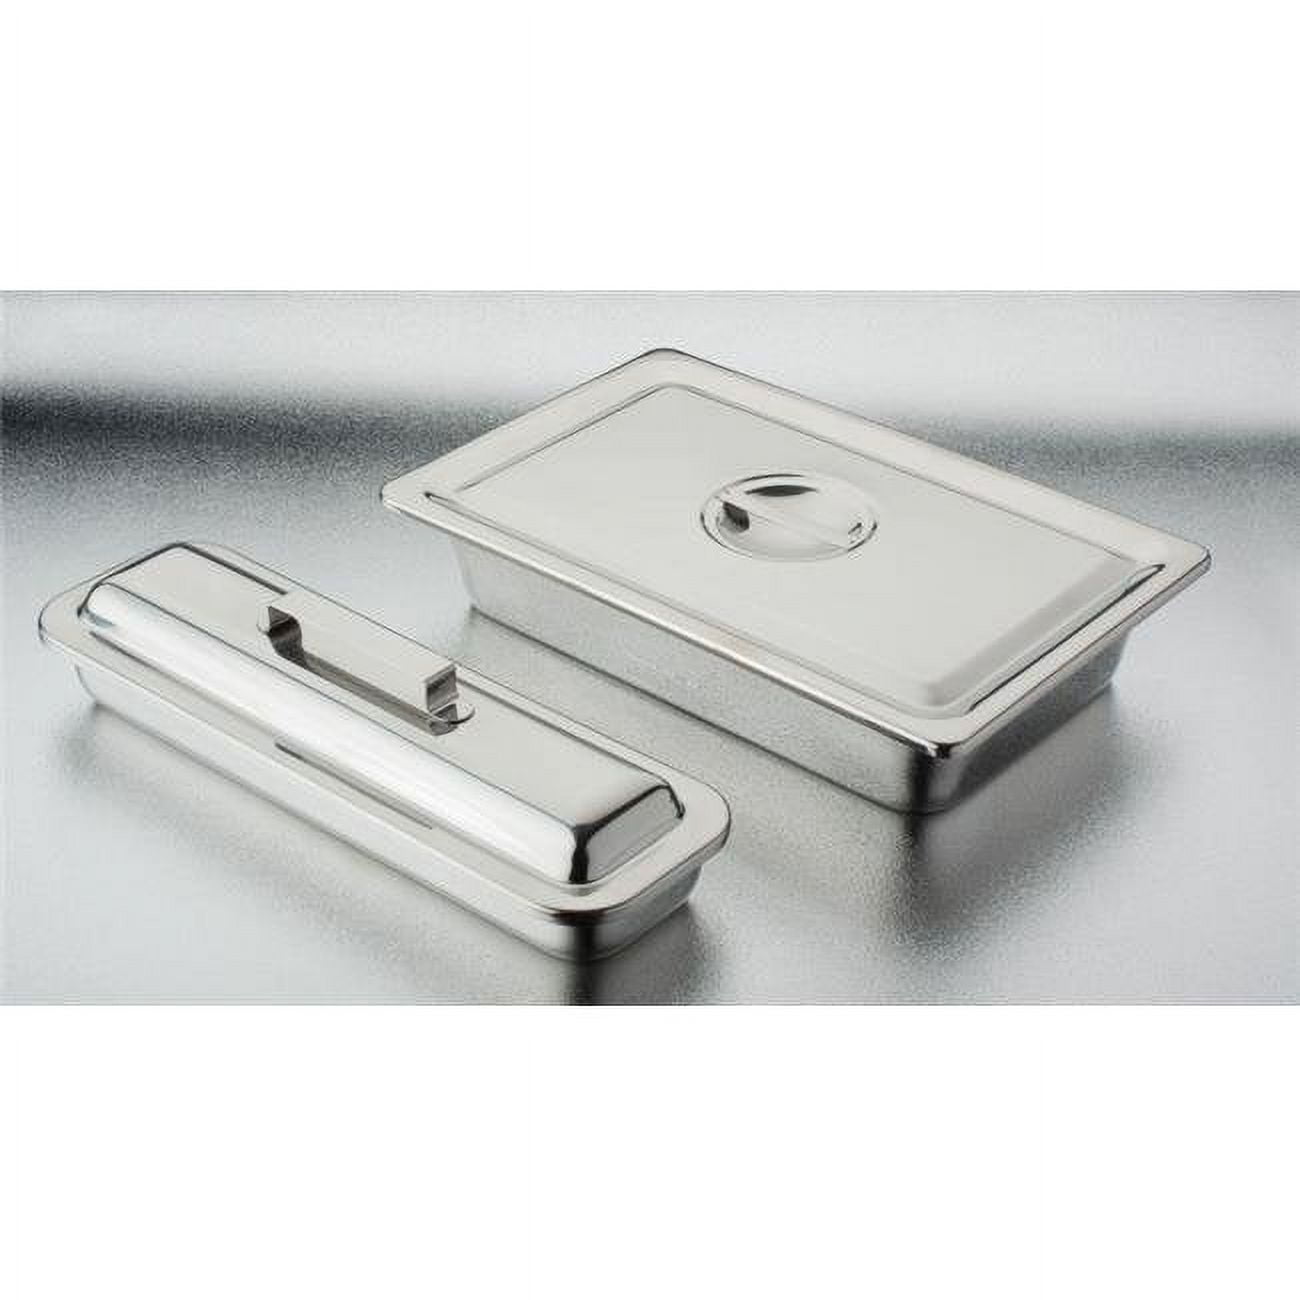 4260 12 X 8 X 2 In. Stainless Steel Instrument Tray With Strap Handle